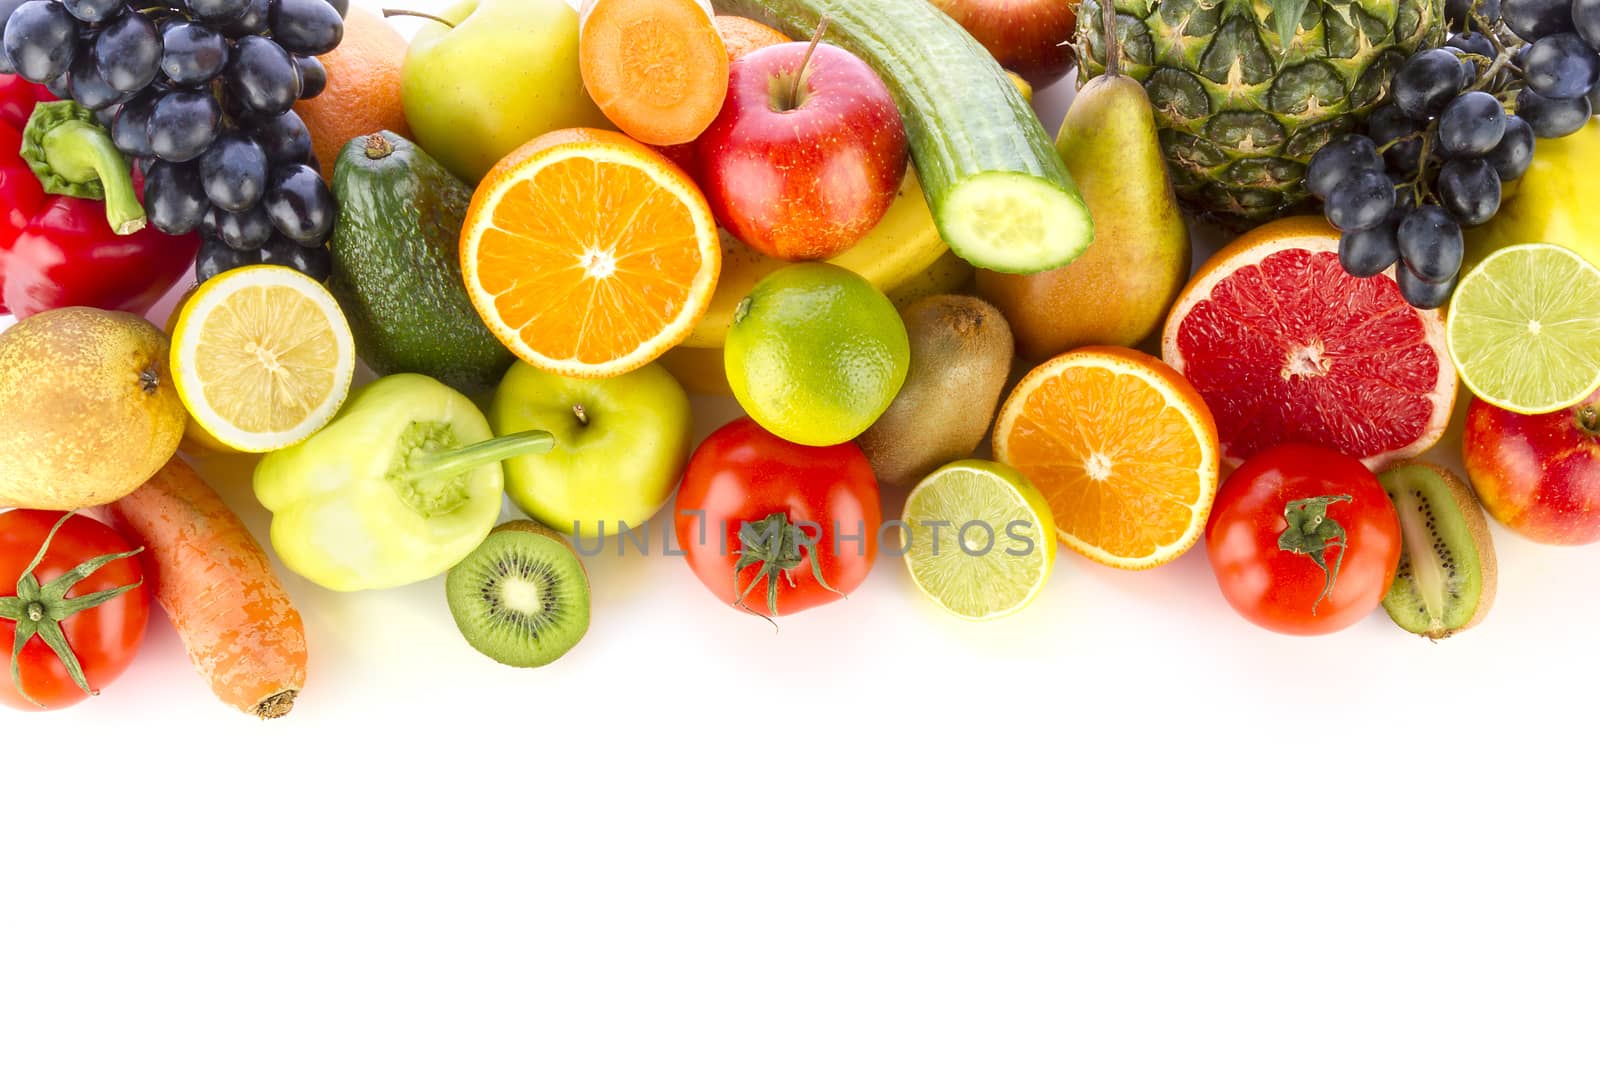 Fresh fruits and vegetables by manaemedia